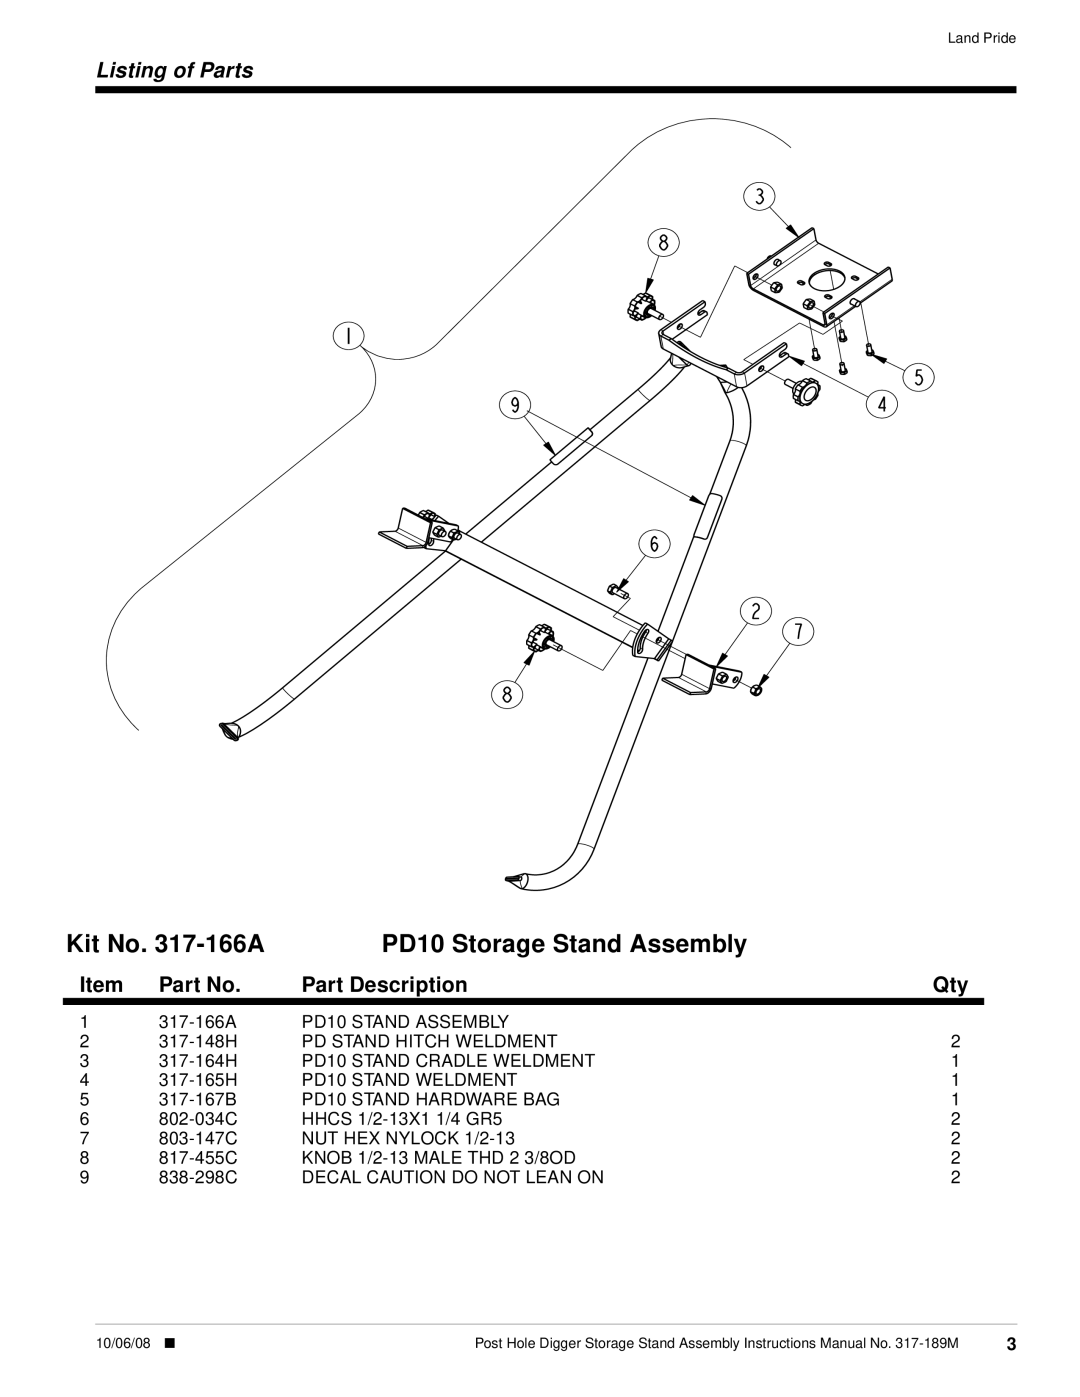 Land Pride DP25 installation instructions Kit No. 317-166A, PD10 Storage Stand Assembly, Listing of Parts, Part Description 